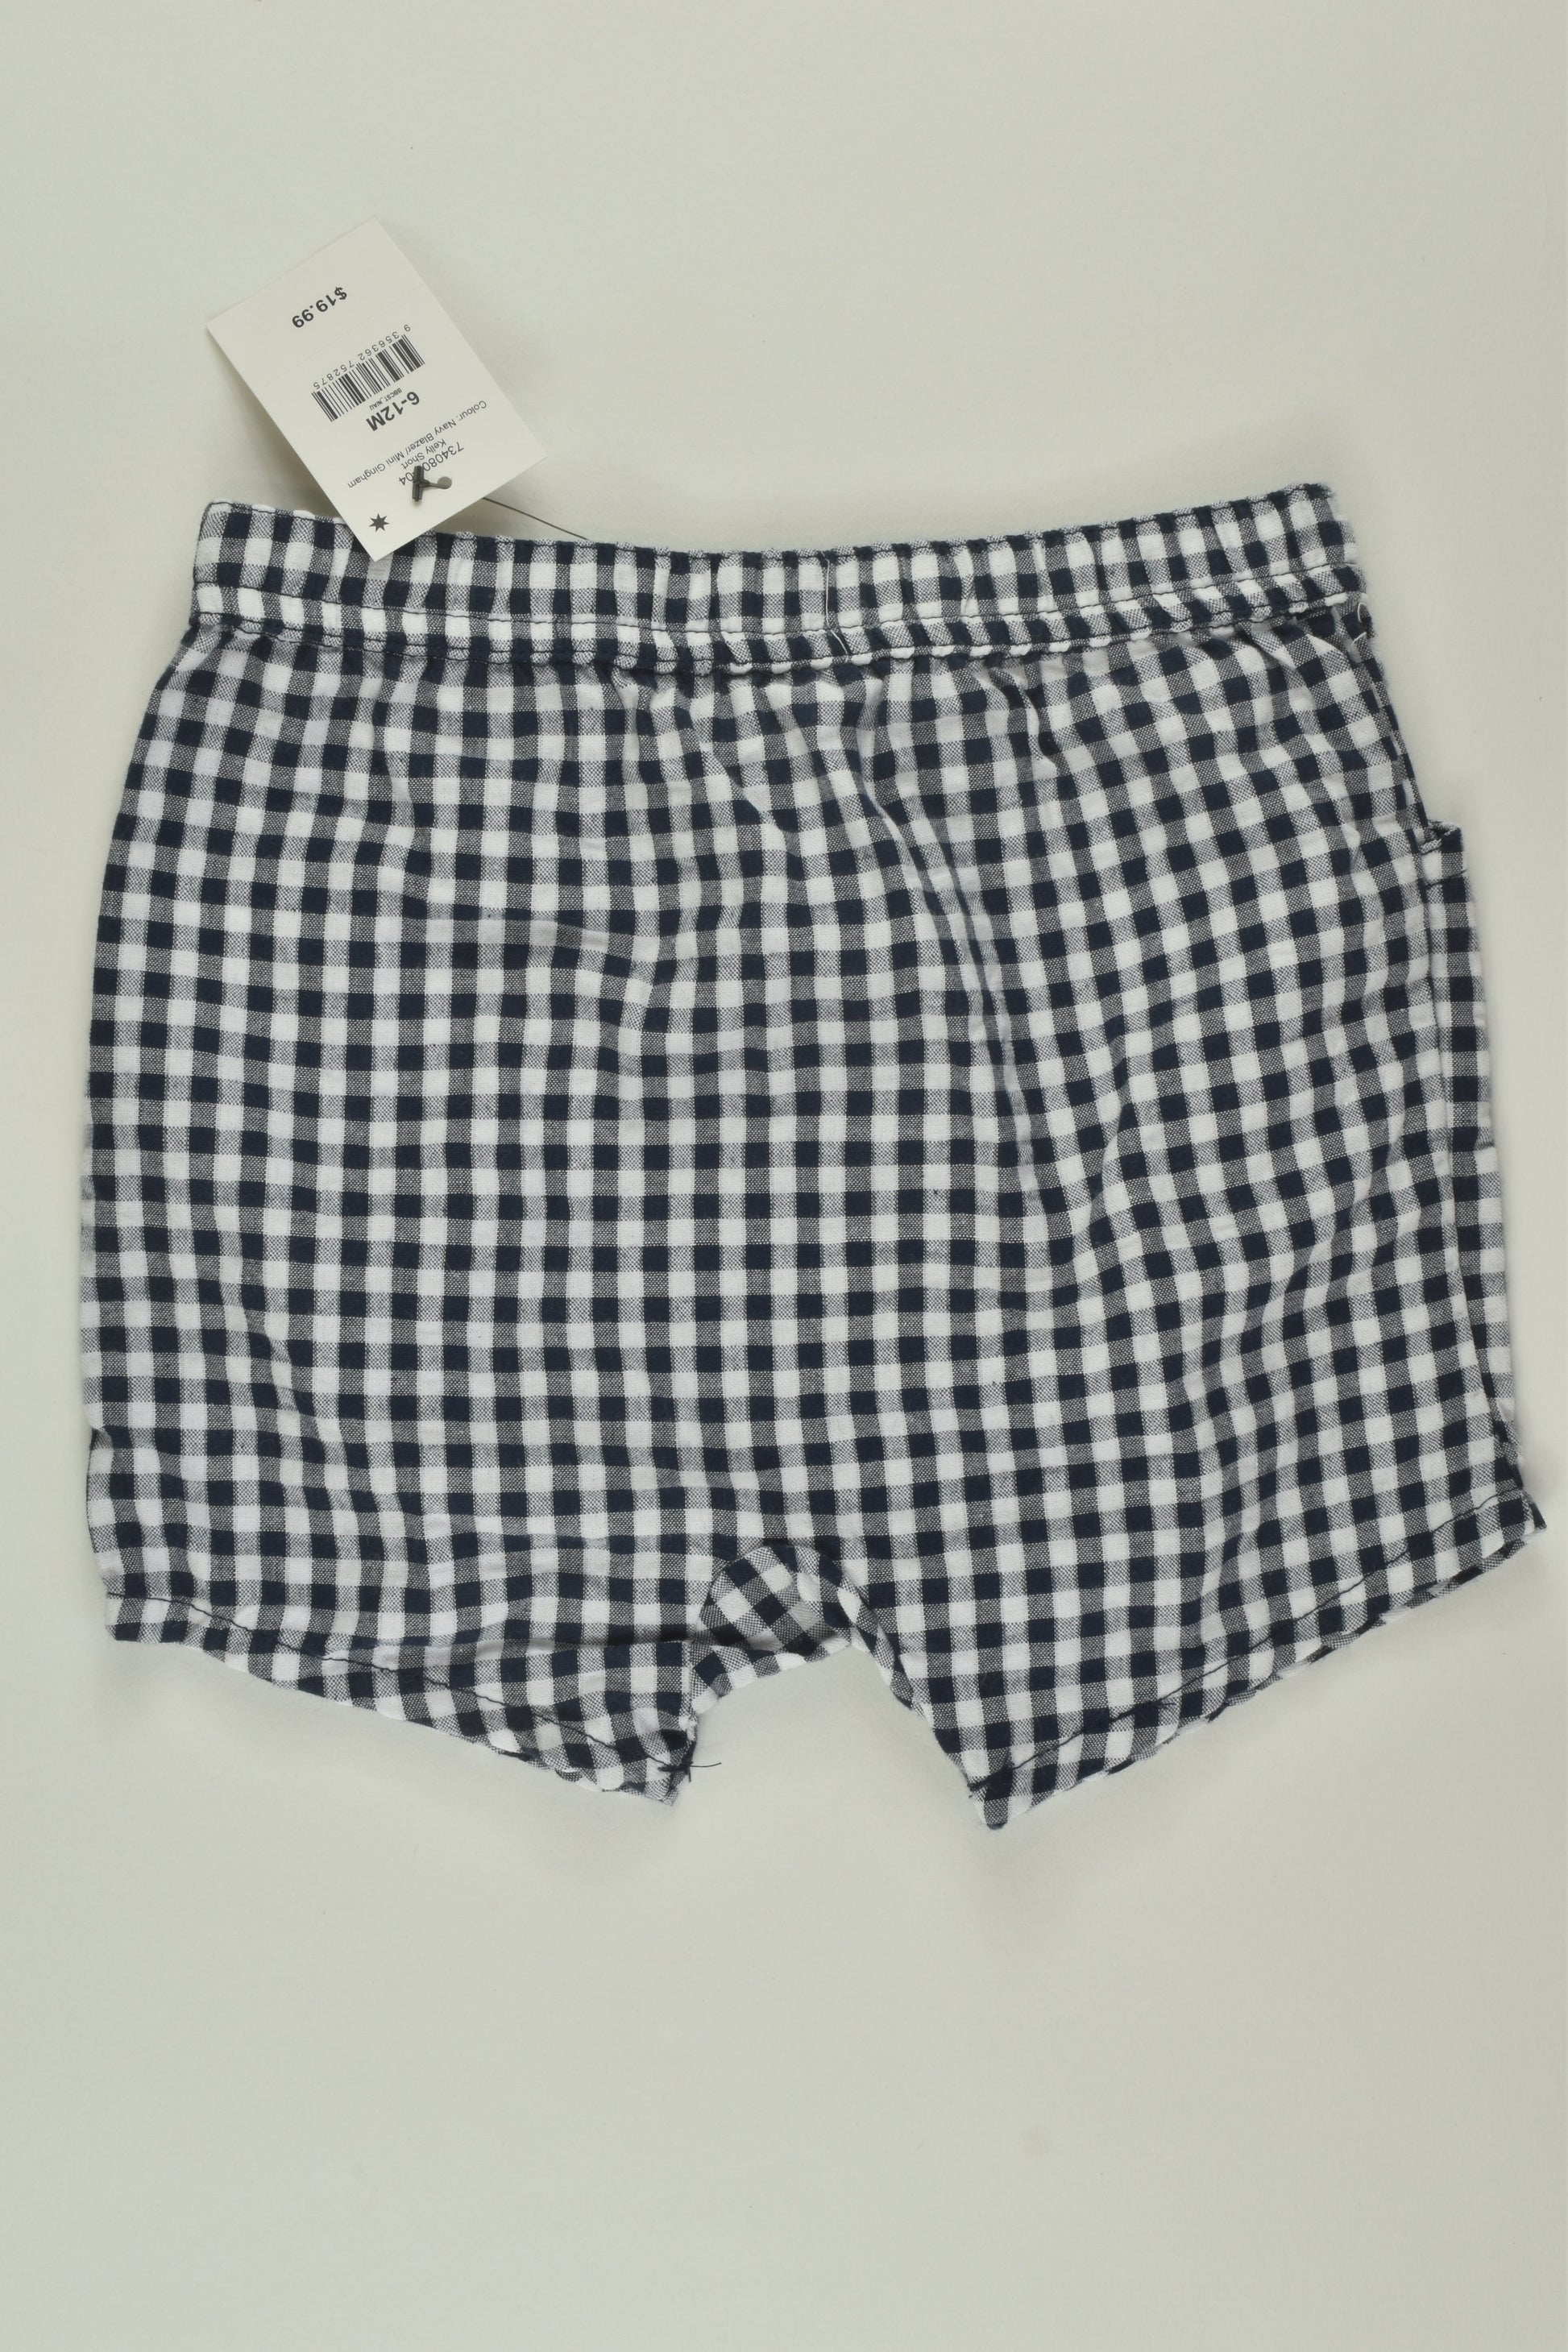 NEW Cotton On Baby Size 0 Checked Shorts